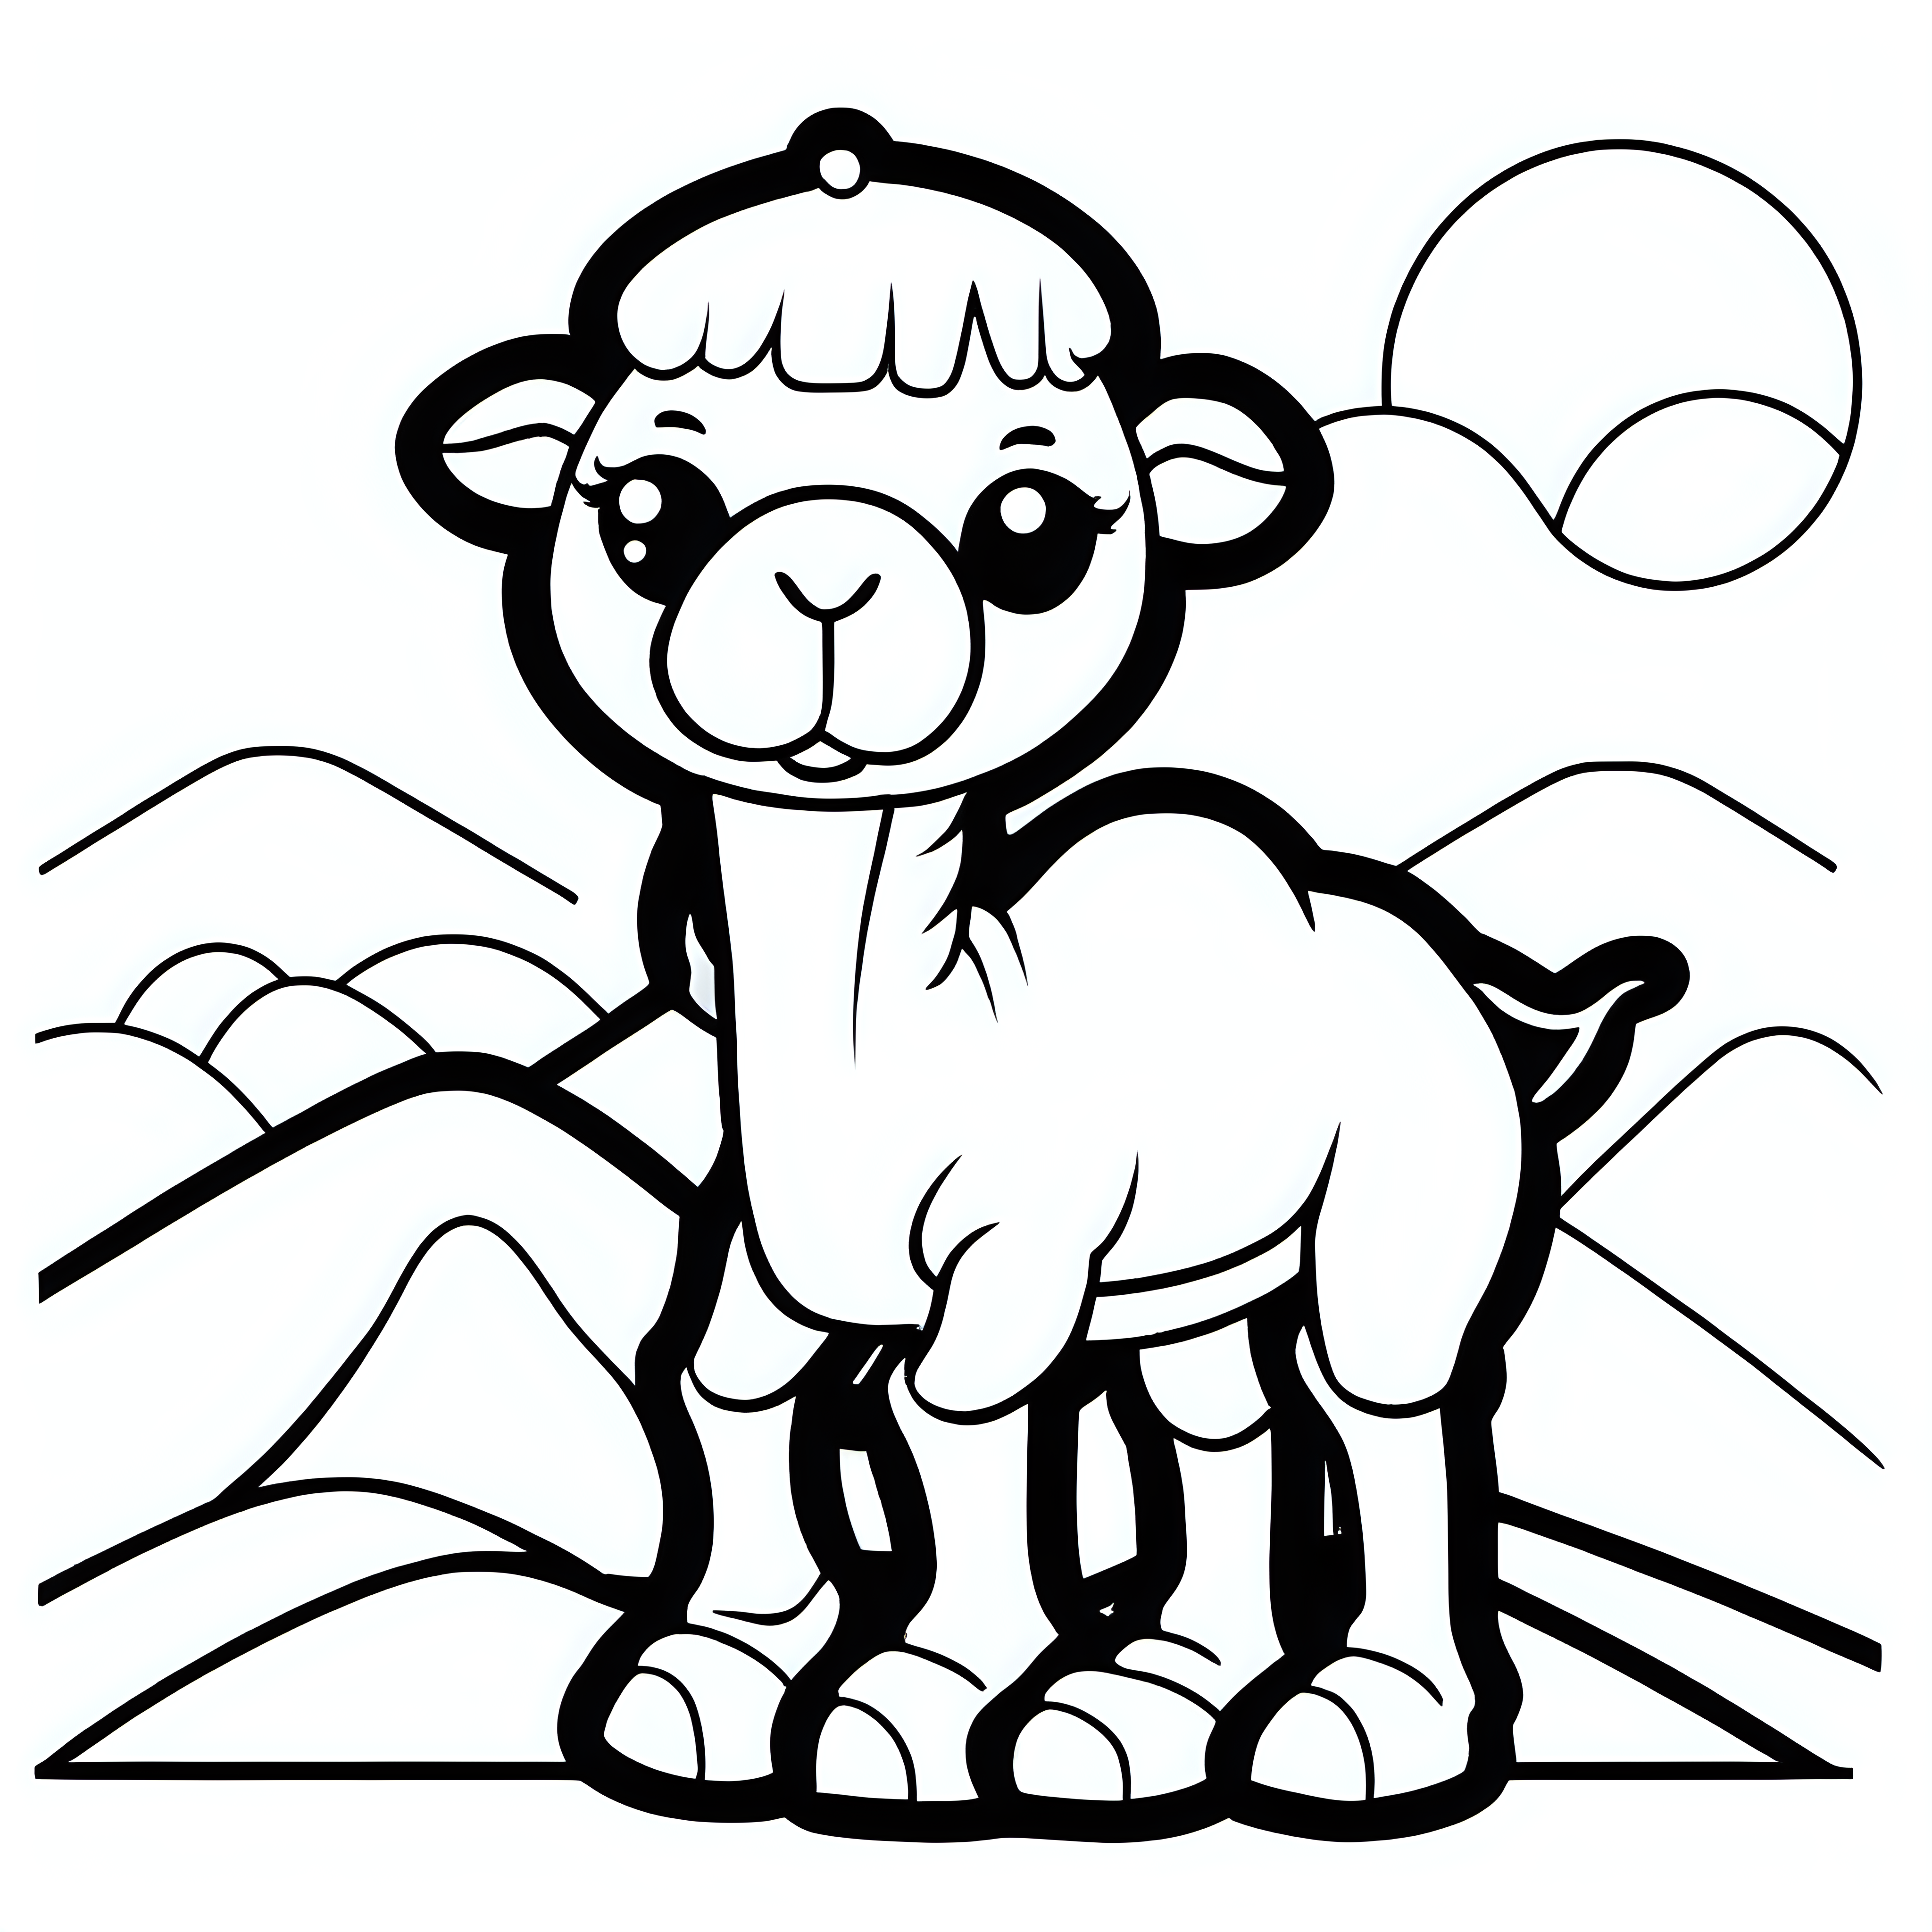 Create a cute Camel outline in black simple